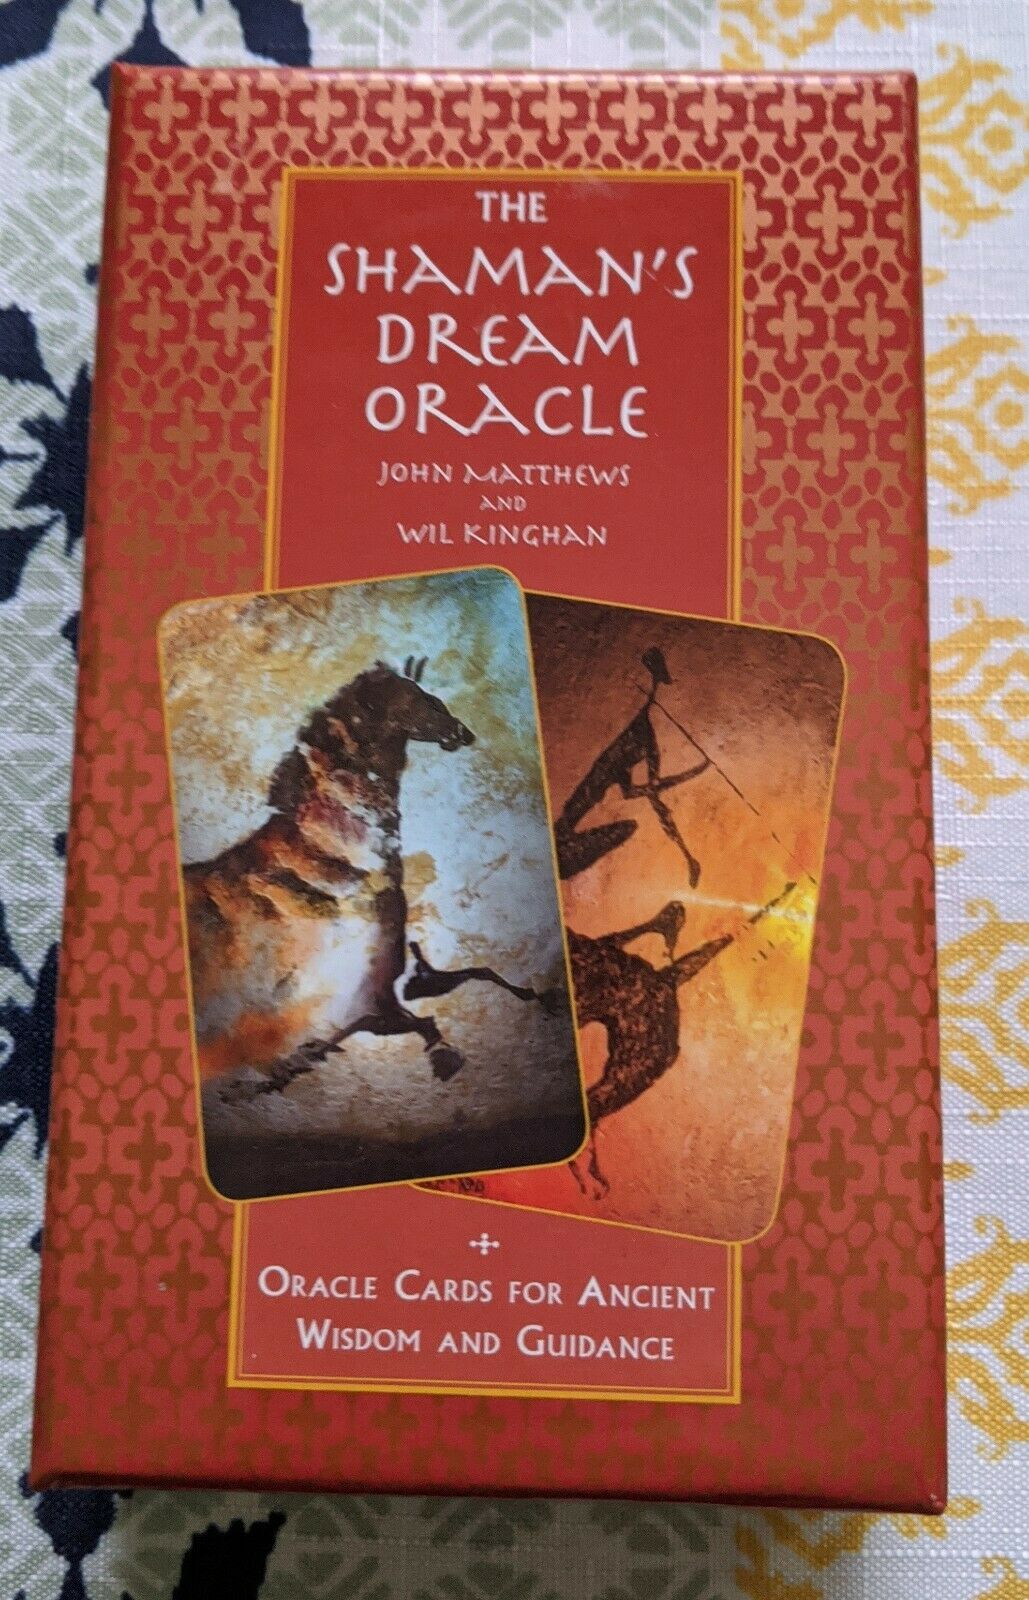 The Shaman’s Dream Oracle John Matthews 52 Fortune Telling Oracle Cards New